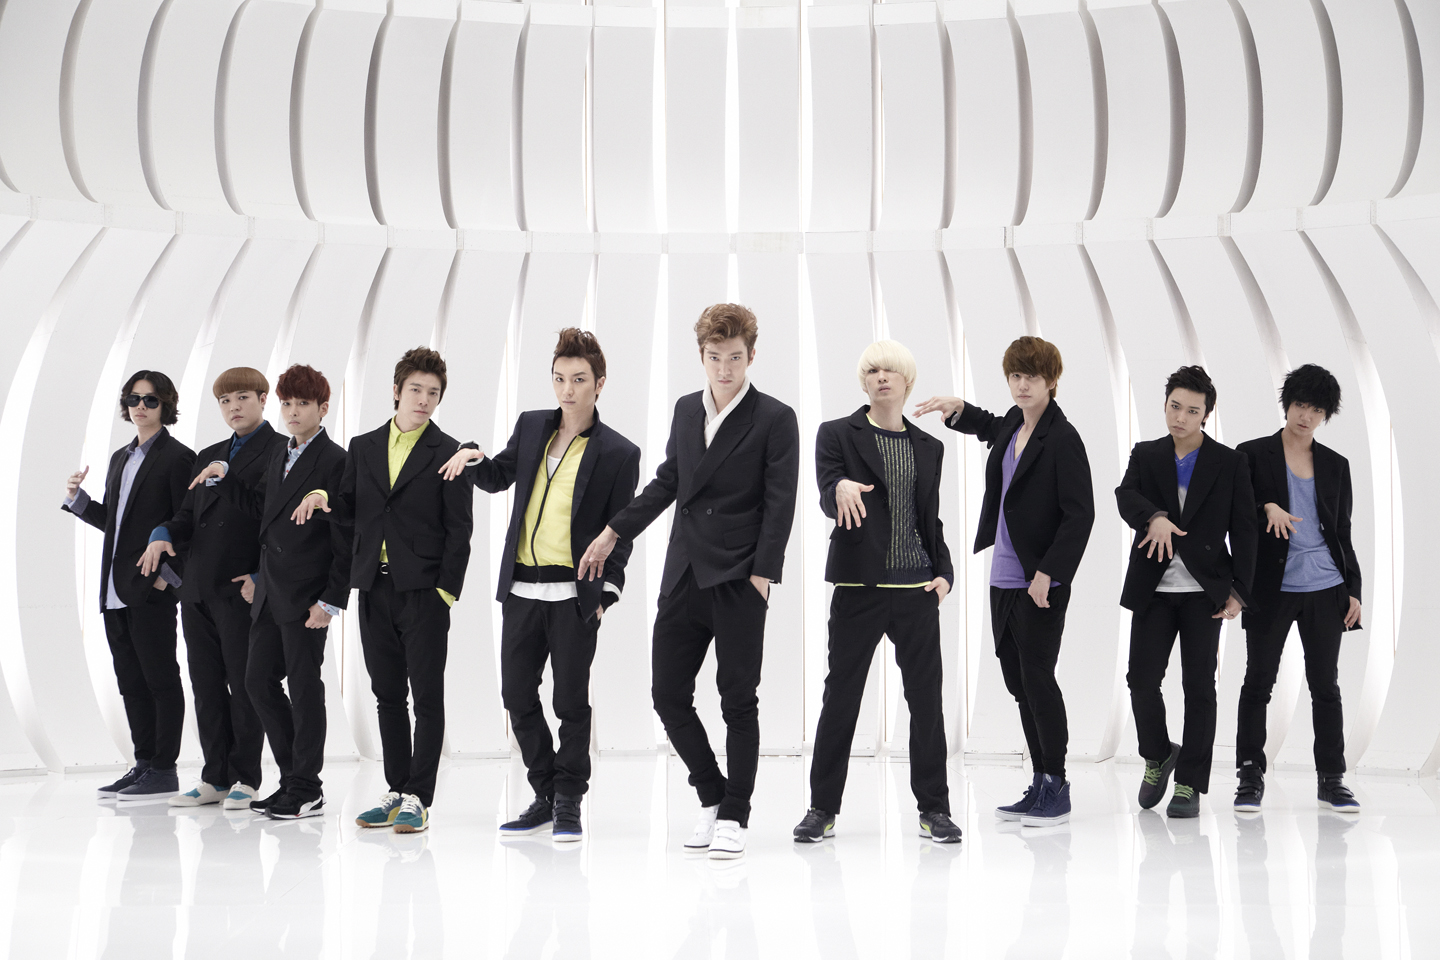 Wallpapers Of The Day Super Junior 1440x960 Super Junior Wall Paper